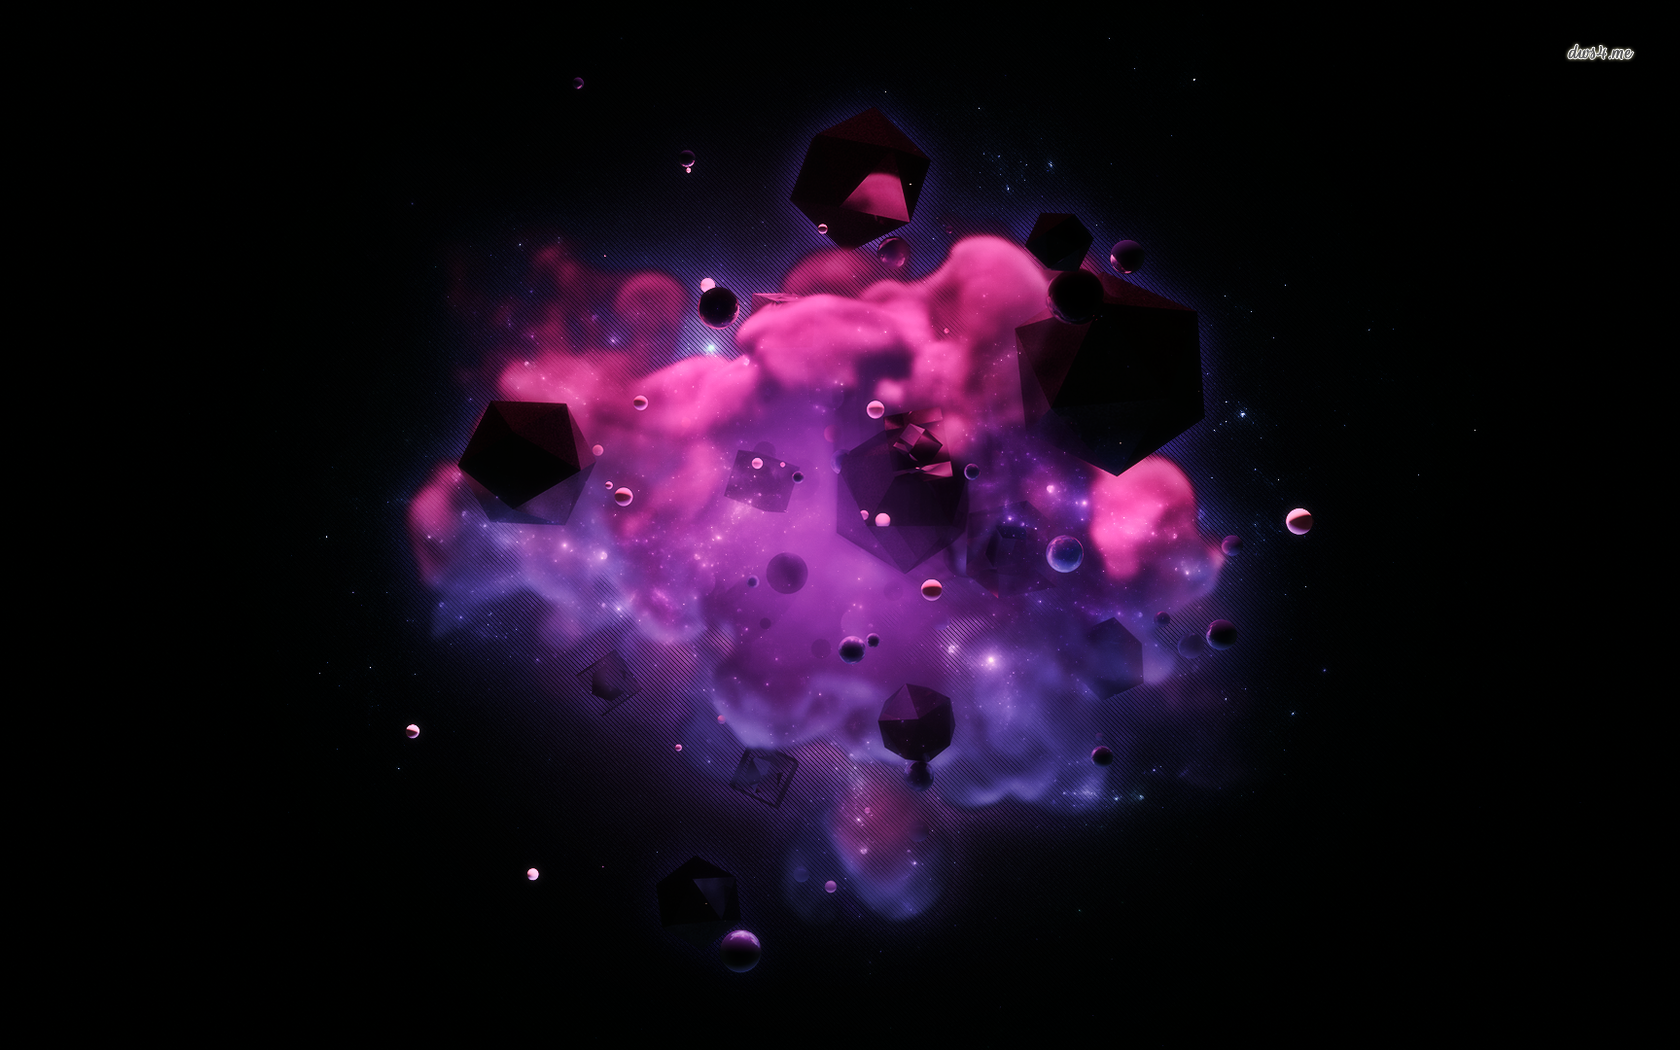 Black shapes emerging from the purple clouds wallpaper